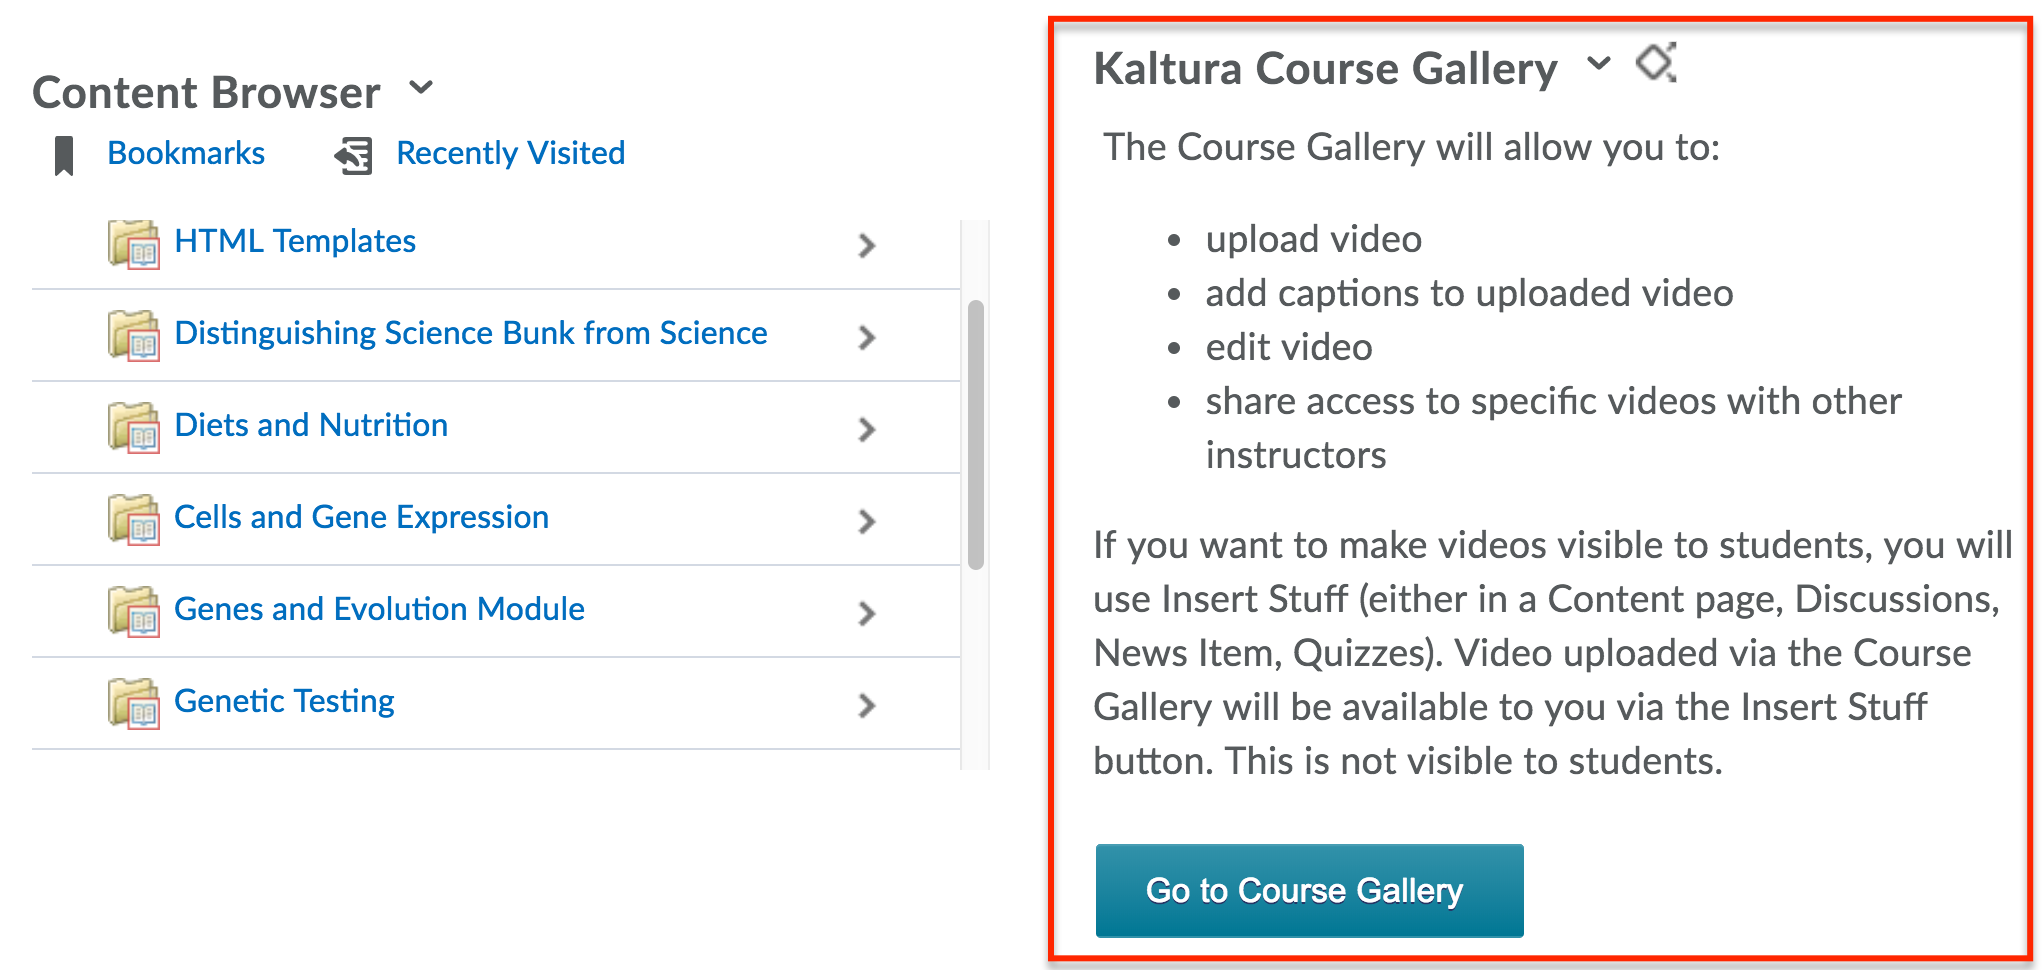 Course Gallery widget is now present on your Course homepage.